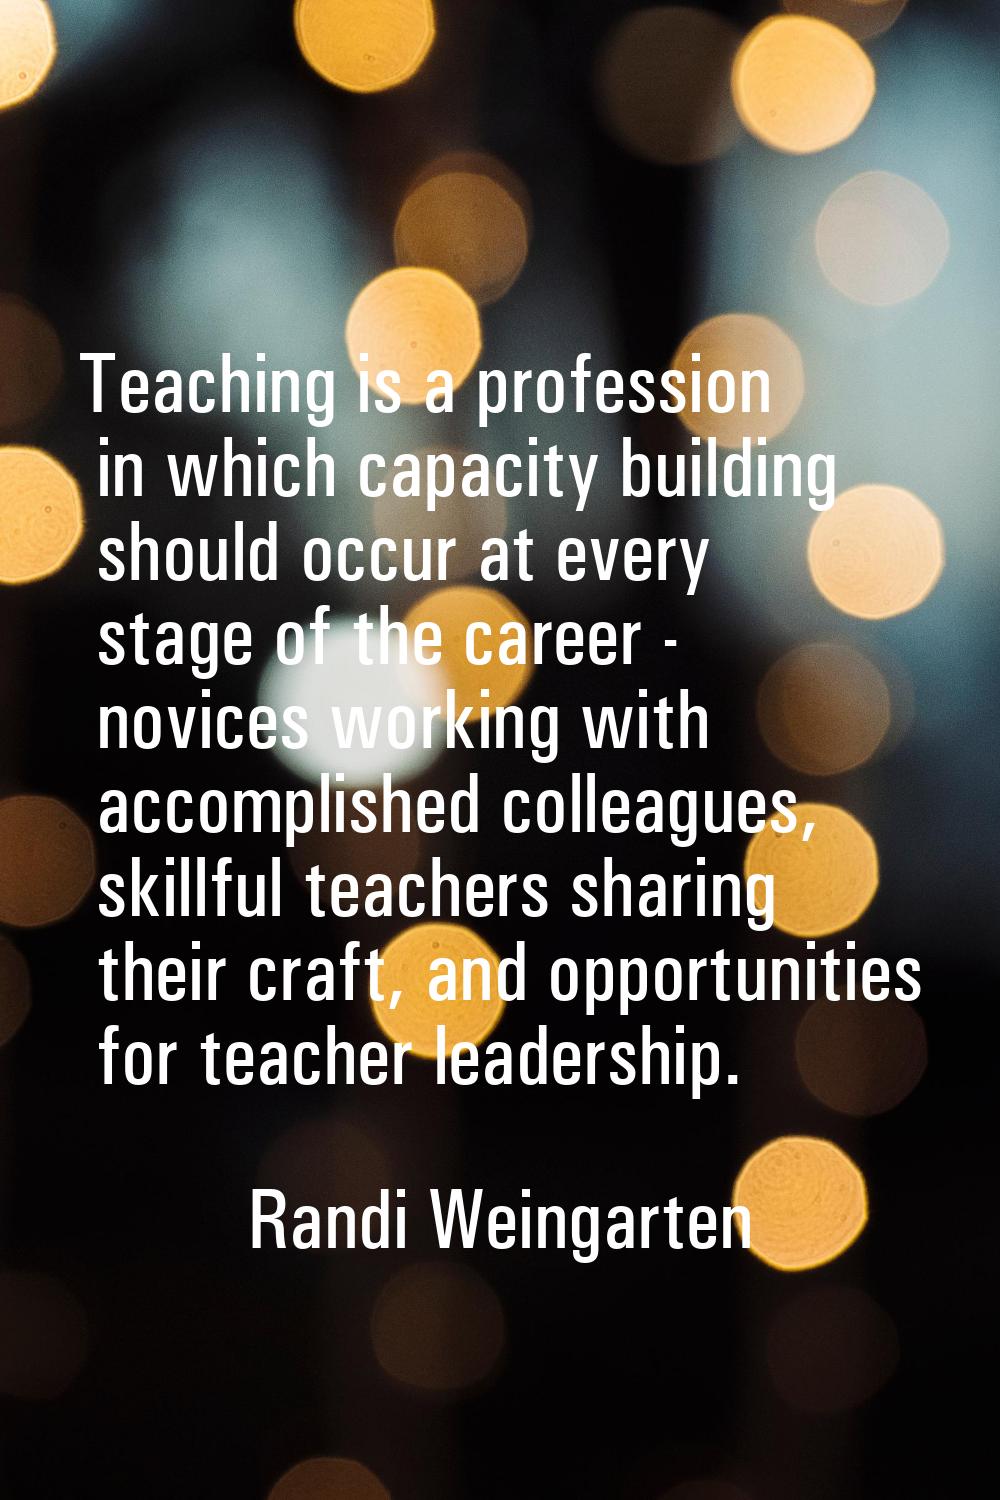 Teaching is a profession in which capacity building should occur at every stage of the career - nov